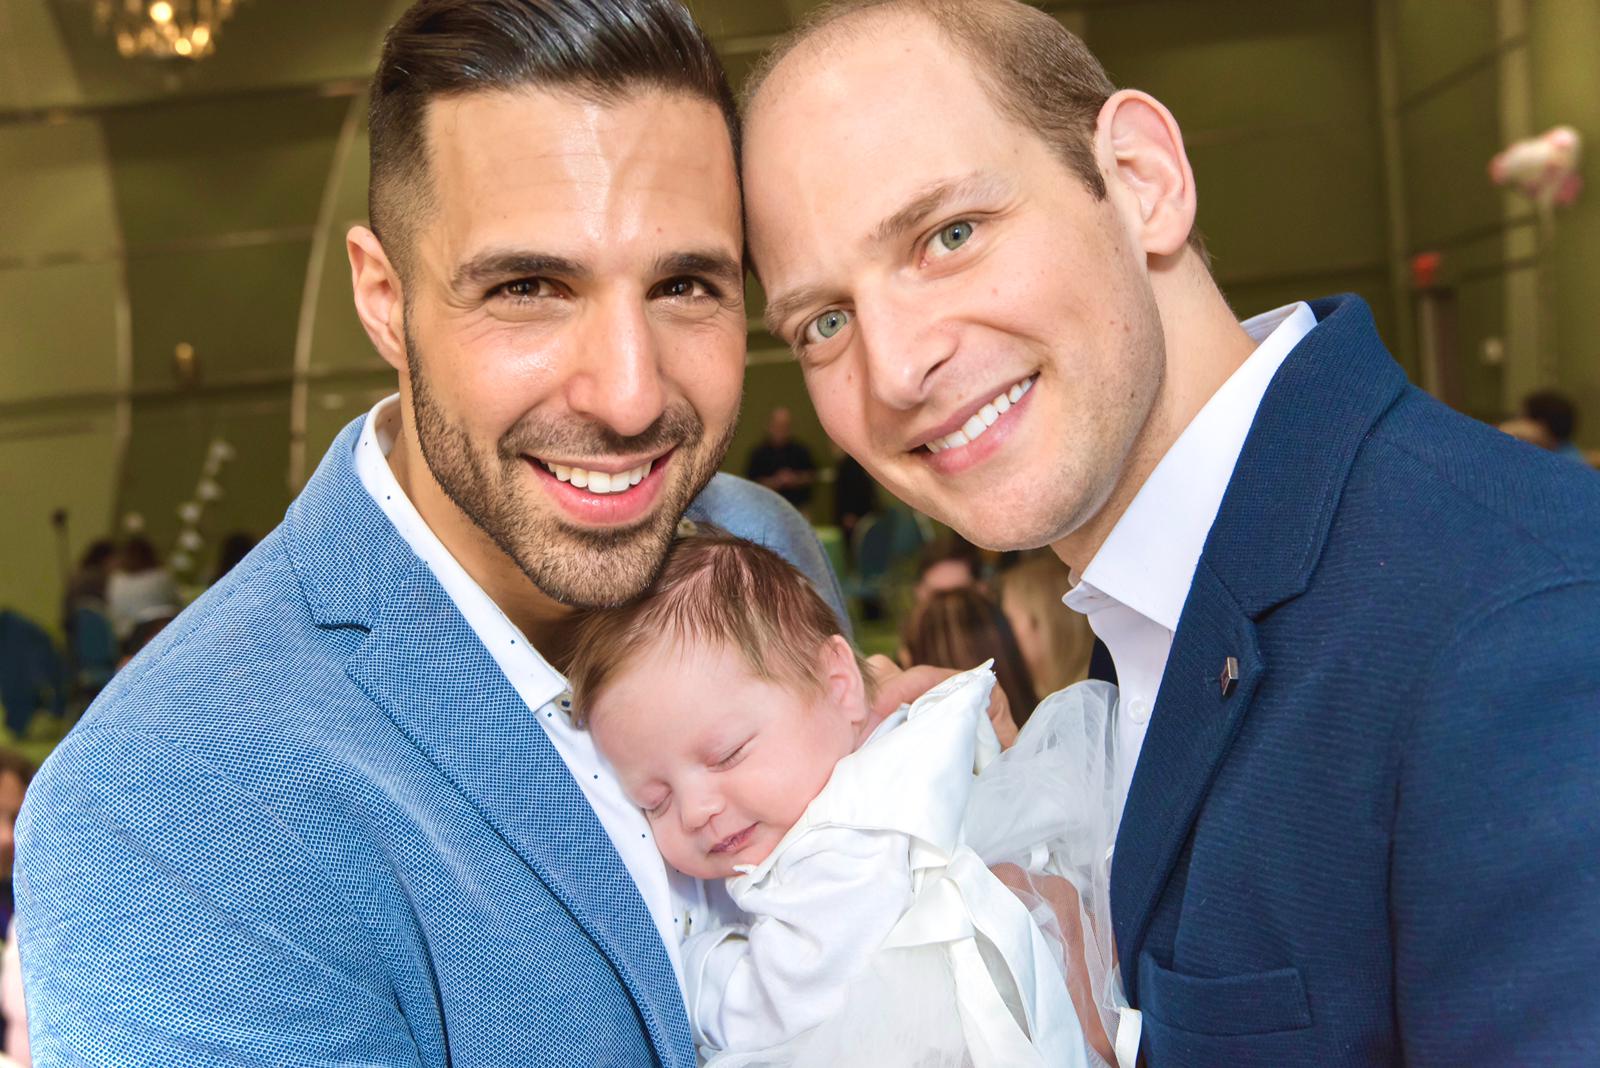 Nadav and Aylee with their daughter Aviv